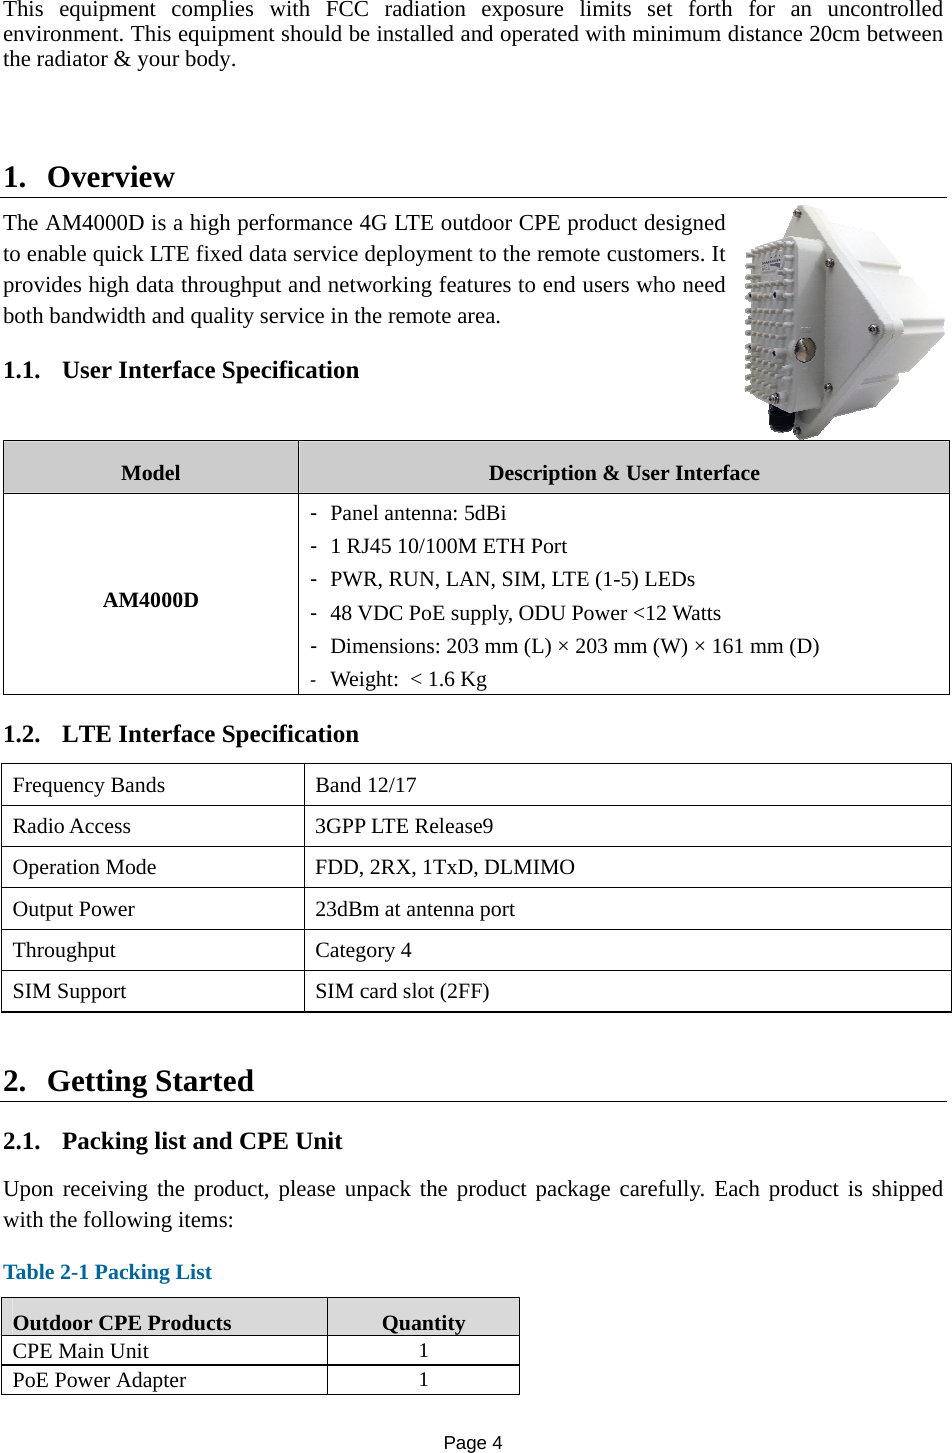 Page 4   This equipment complies with FCC radiation exposure limits set forth for an uncontrolled environment. This equipment should be installed and operated with minimum distance 20cm between the radiator &amp; your body.   1. Overview The AM4000D is a high performance 4G LTE outdoor CPE product designed to enable quick LTE fixed data service deployment to the remote customers. It provides high data throughput and networking features to end users who need both bandwidth and quality service in the remote area.  1.1. User Interface Specification Model  Description &amp; User Interface AM4000D -  Panel antenna: 5dBi -  1 RJ45 10/100M ETH Port -  PWR, RUN, LAN, SIM, LTE (1-5) LEDs -  48 VDC PoE supply, ODU Power &lt;12 Watts -  Dimensions: 203 mm (L) × 203 mm (W) × 161 mm (D) -  Weight:  &lt; 1.6 Kg 1.2. LTE Interface Specification Frequency Bands    Band 12/17 Radio Access  3GPP LTE Release9 Operation Mode  FDD, 2RX, 1TxD, DLMIMO Output Power  23dBm at antenna port Throughput Category 4 SIM Support  SIM card slot (2FF) 2. Getting Started   2.1. Packing list and CPE Unit Upon receiving the product, please unpack the product package carefully. Each product is shipped with the following items:  Table 2-1 Packing List Outdoor CPE Products  Quantity CPE Main Unit  1 PoE Power Adapter  1 